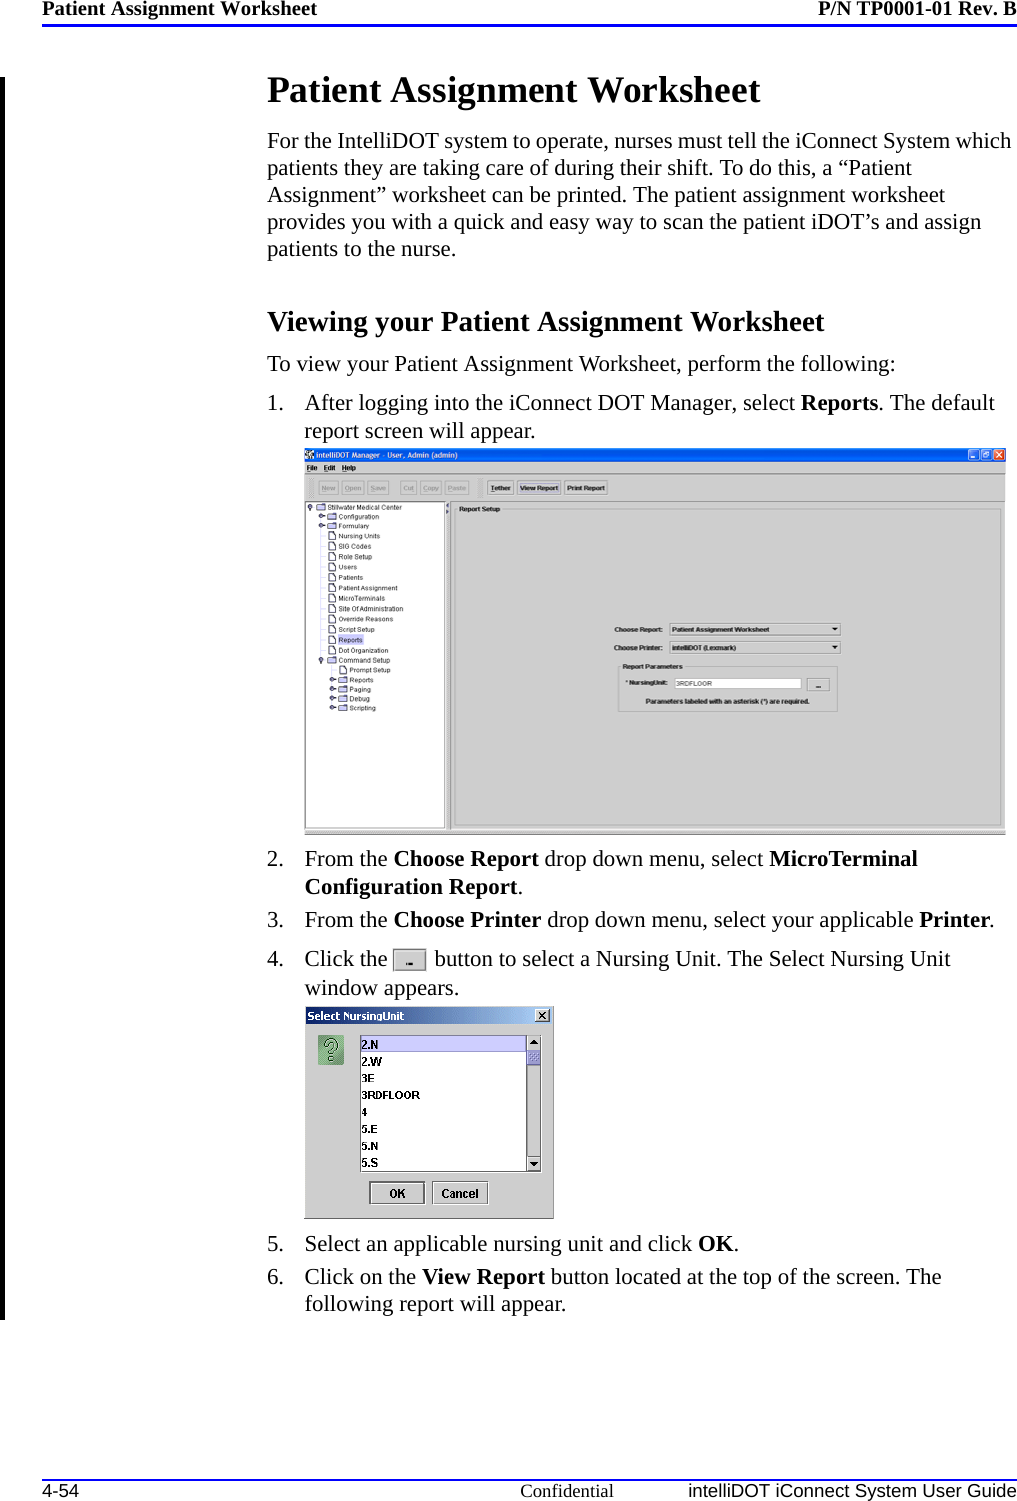 Patient Assignment Worksheet P/N TP0001-01 Rev. B4-54 Confidential intelliDOT iConnect System User GuidePatient Assignment Worksheet For the IntelliDOT system to operate, nurses must tell the iConnect System which patients they are taking care of during their shift. To do this, a “Patient Assignment” worksheet can be printed. The patient assignment worksheet provides you with a quick and easy way to scan the patient iDOT’s and assign patients to the nurse.Viewing your Patient Assignment WorksheetTo view your Patient Assignment Worksheet, perform the following:1. After logging into the iConnect DOT Manager, select Reports. The default report screen will appear.2. From the Choose Report drop down menu, select MicroTerminal Configuration Report.3. From the Choose Printer drop down menu, select your applicable Printer.4. Click the  button to select a Nursing Unit. The Select Nursing Unit window appears.5. Select an applicable nursing unit and click OK.6. Click on the View Report button located at the top of the screen. The following report will appear.